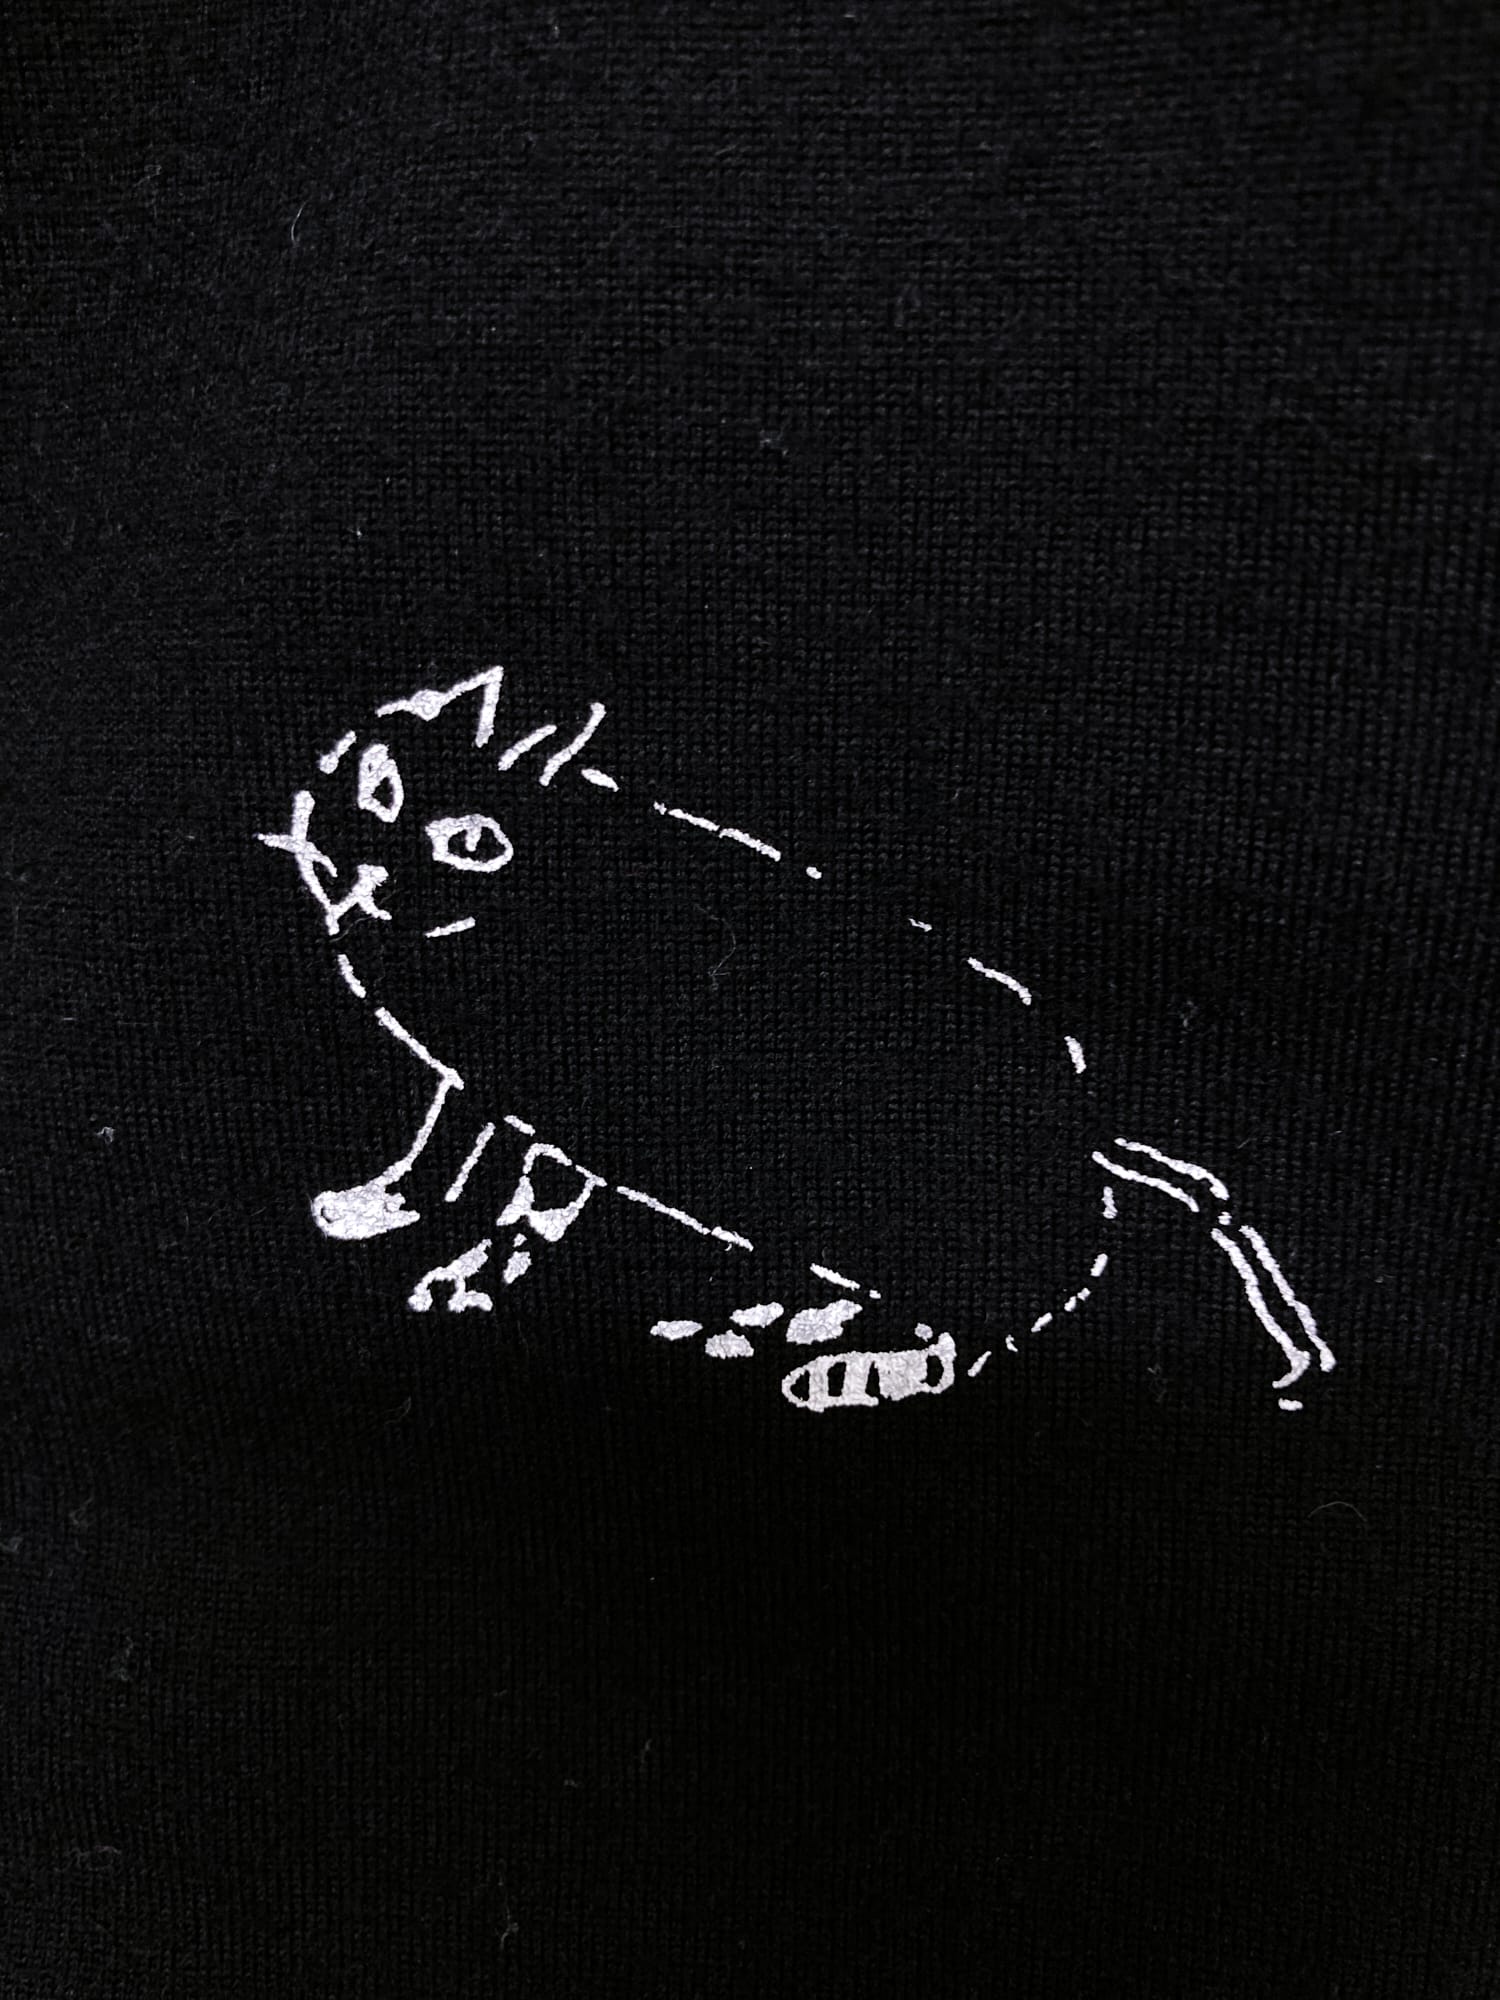 Comme des Garcons AW1989 black wool long sleeve cat top